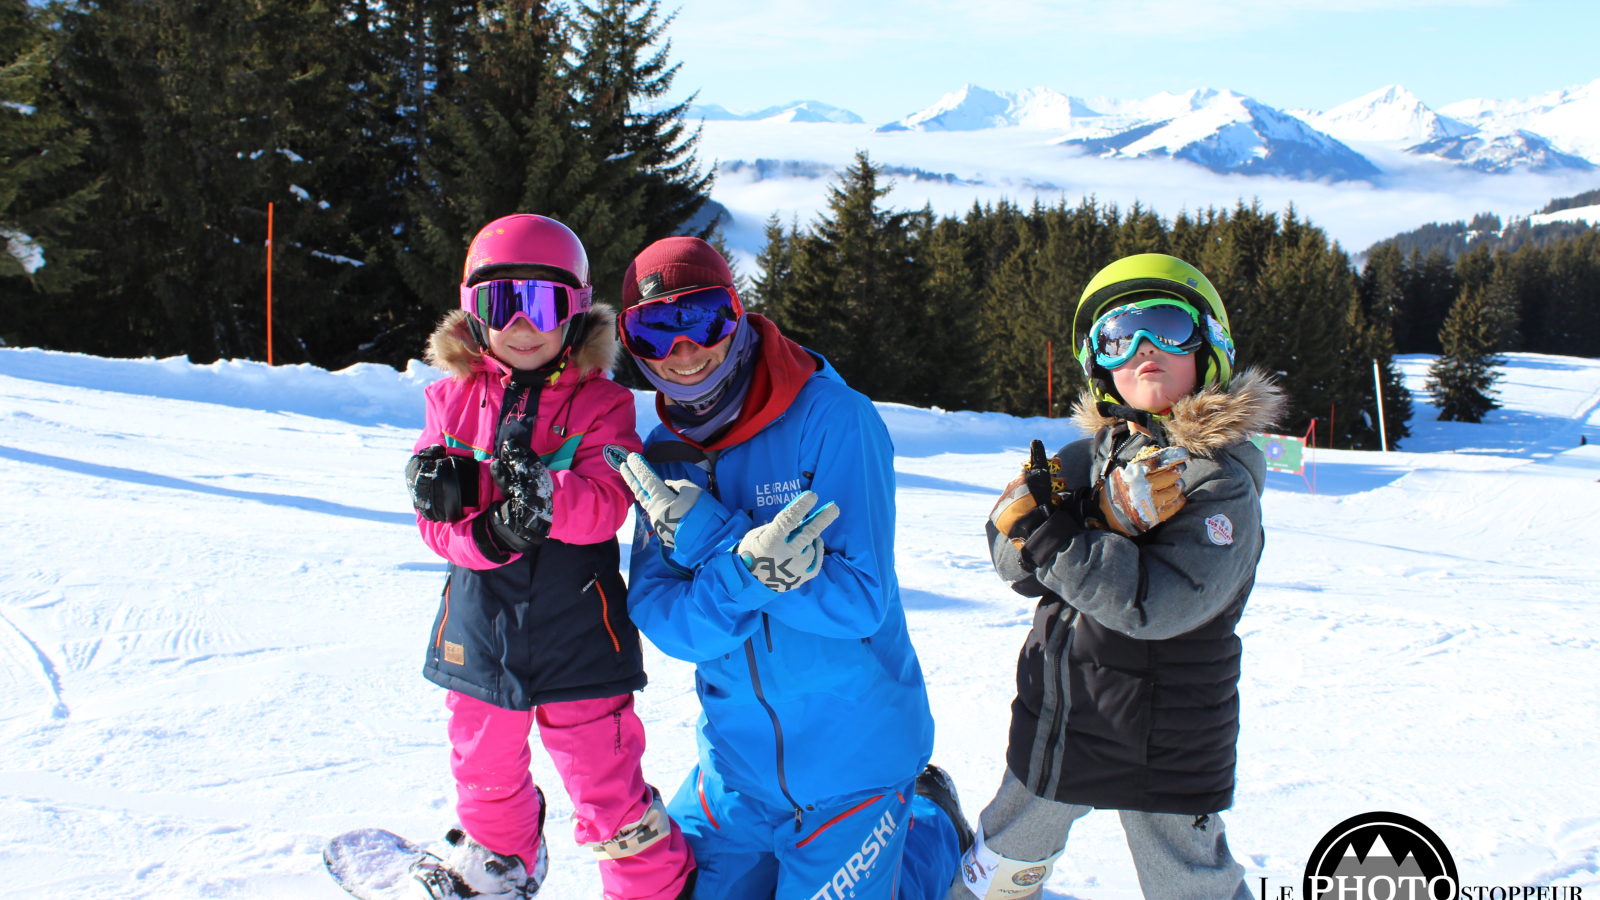 We have snowboard lessons for everyone from mini-shredders from just 8 years old to adults.